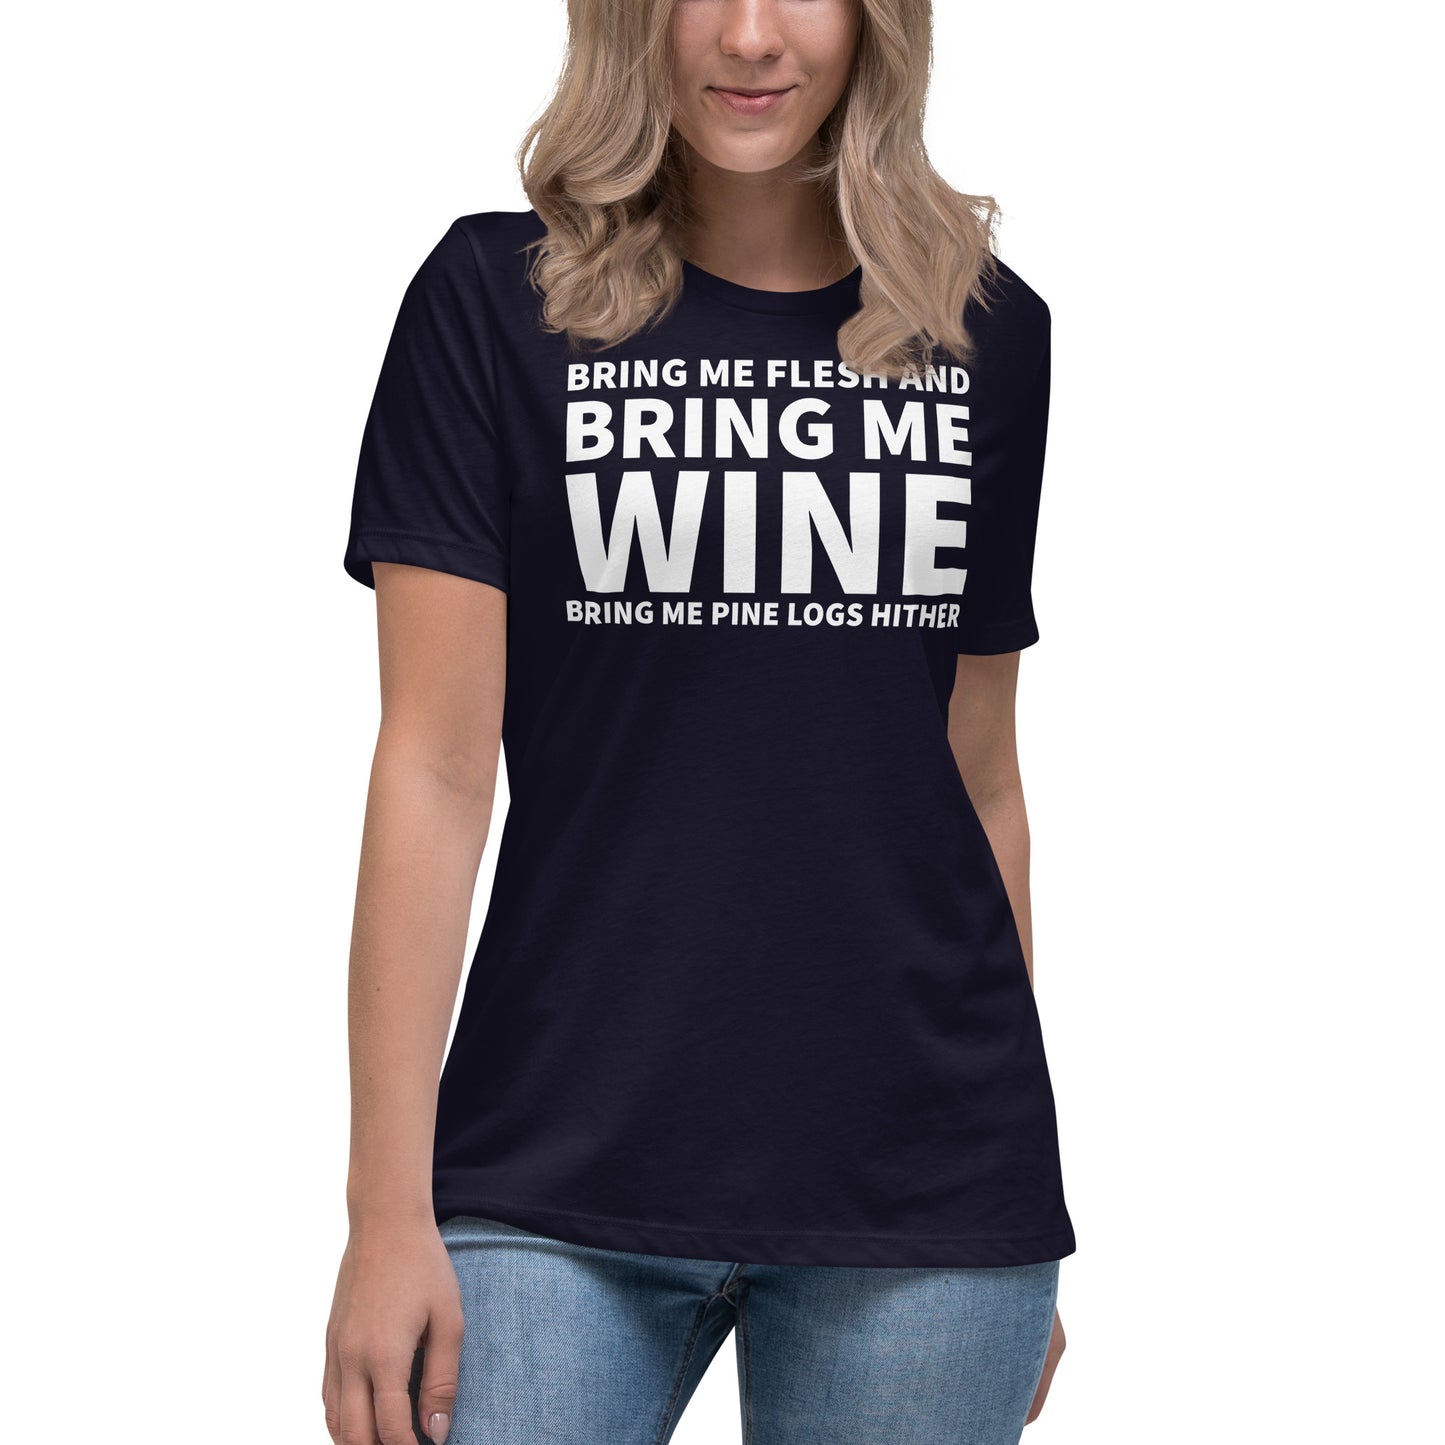 Bring Me Wine - Christmas Women's Relaxed T-Shirt